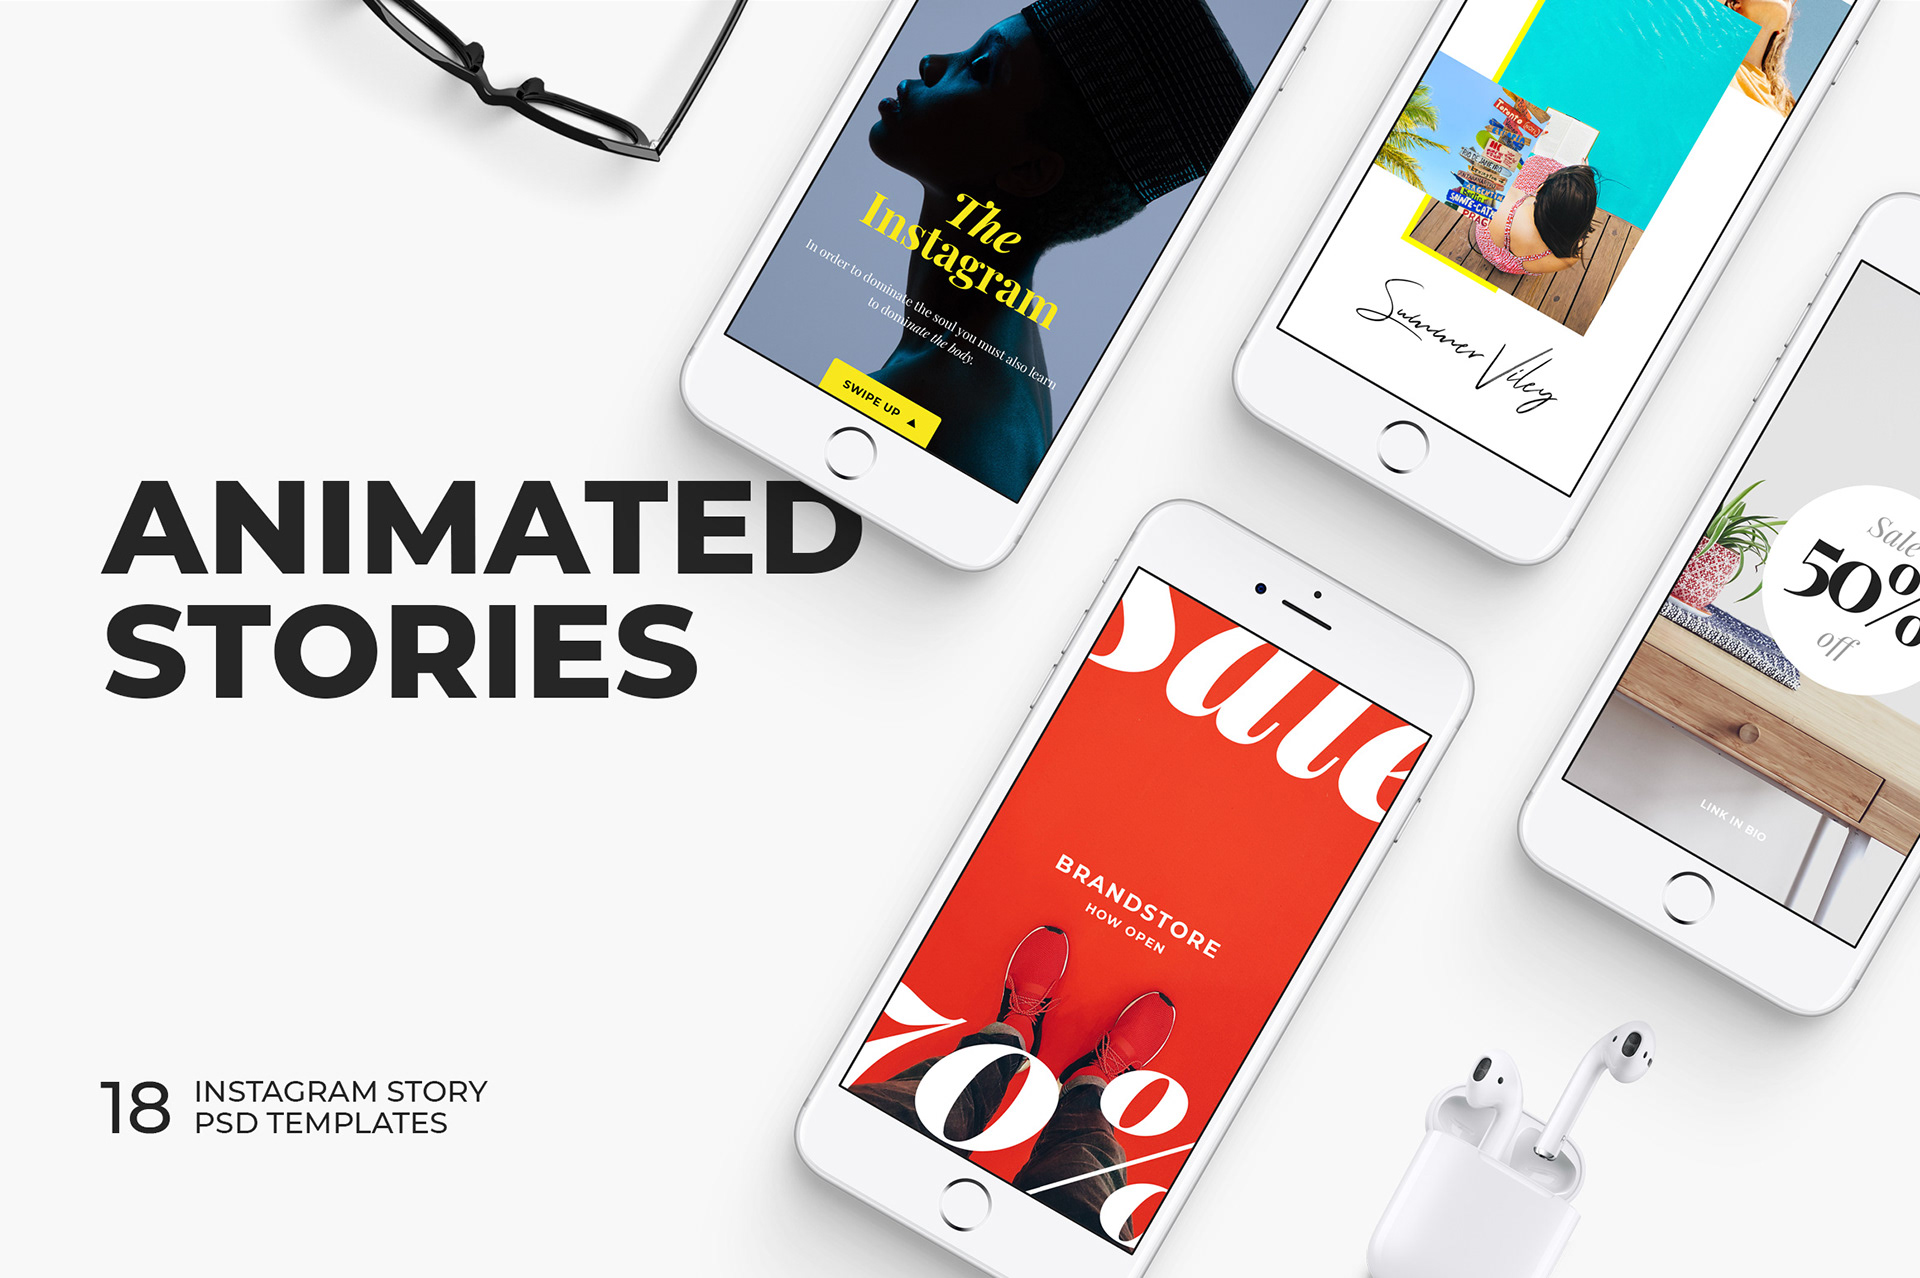 FREE-03 ANIMATED Stories Templates on Behance